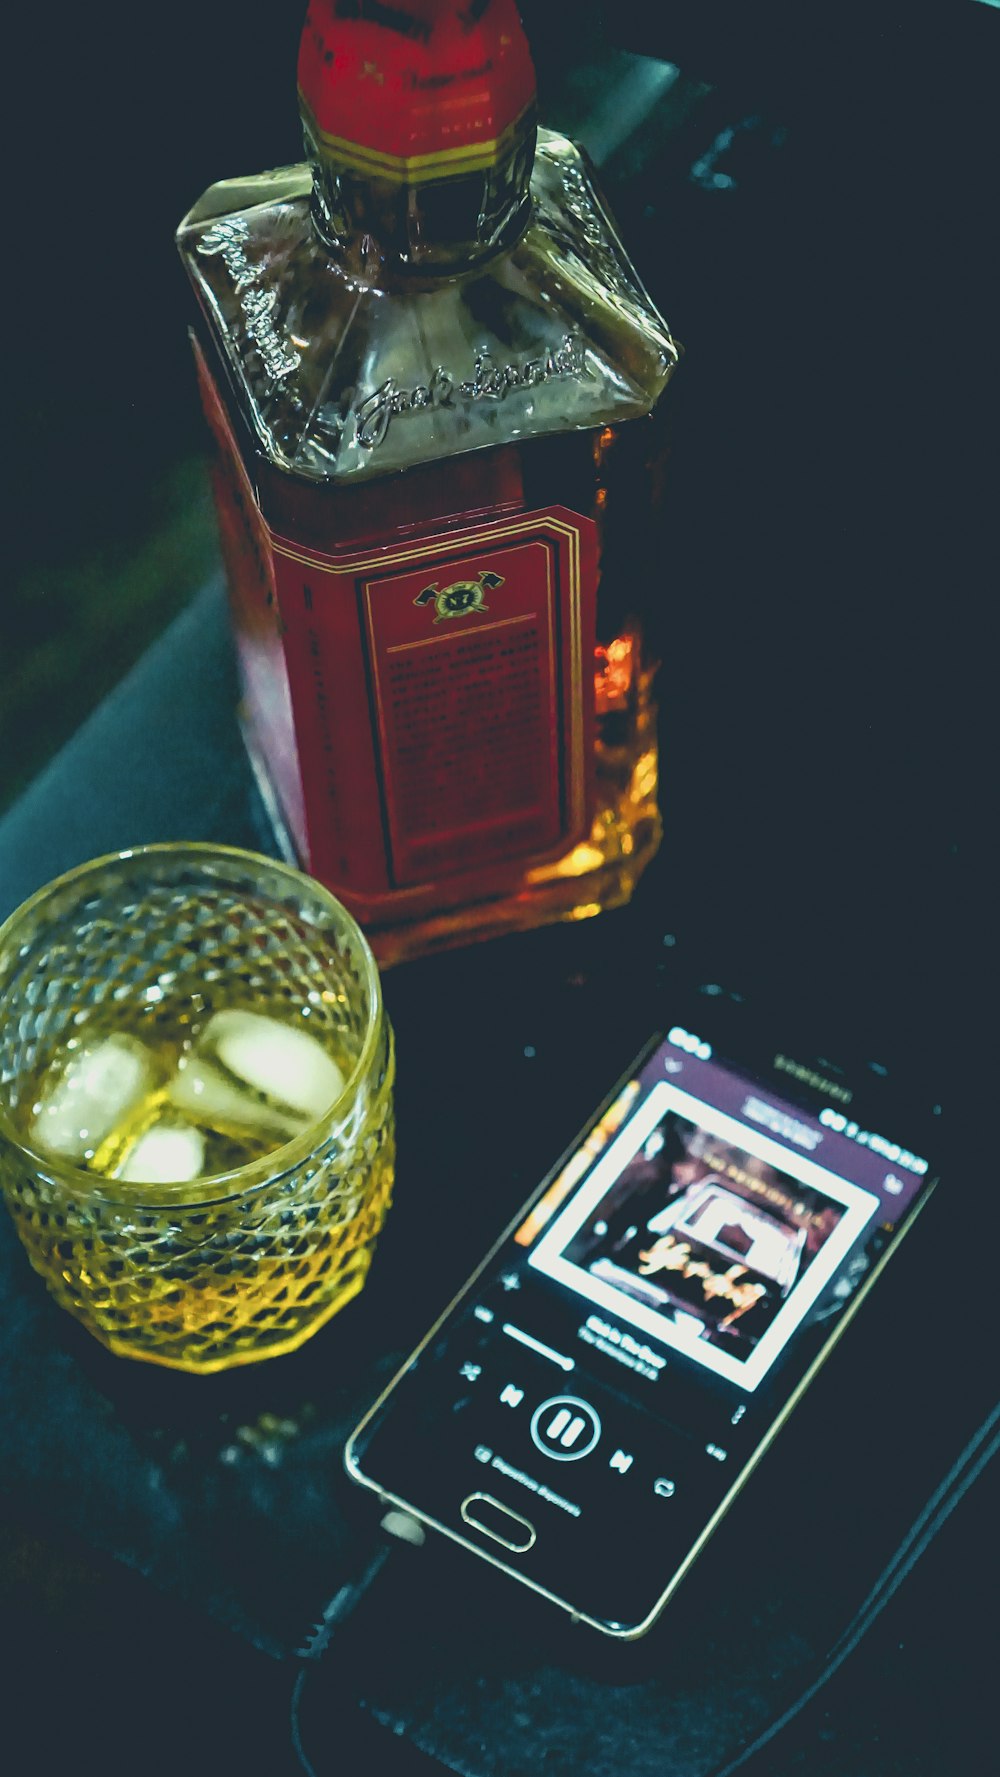 Download Whisky With Ice Cubes In Glass Photo Free Drink Image On Unsplash Yellowimages Mockups